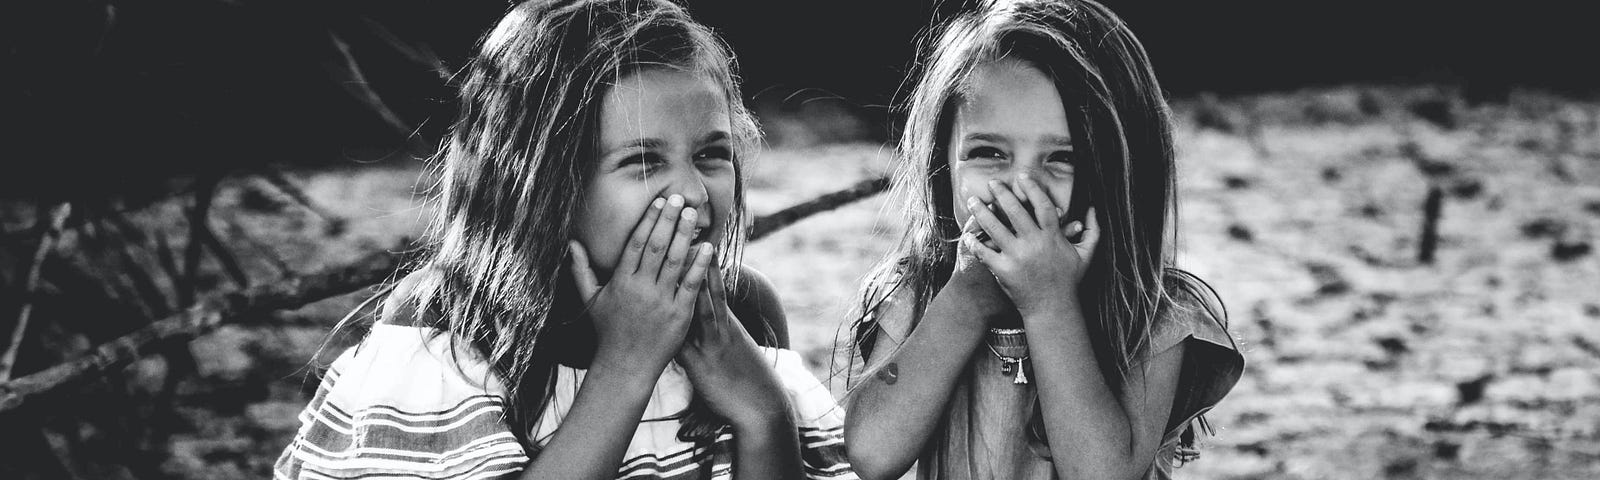 two little girls laughing